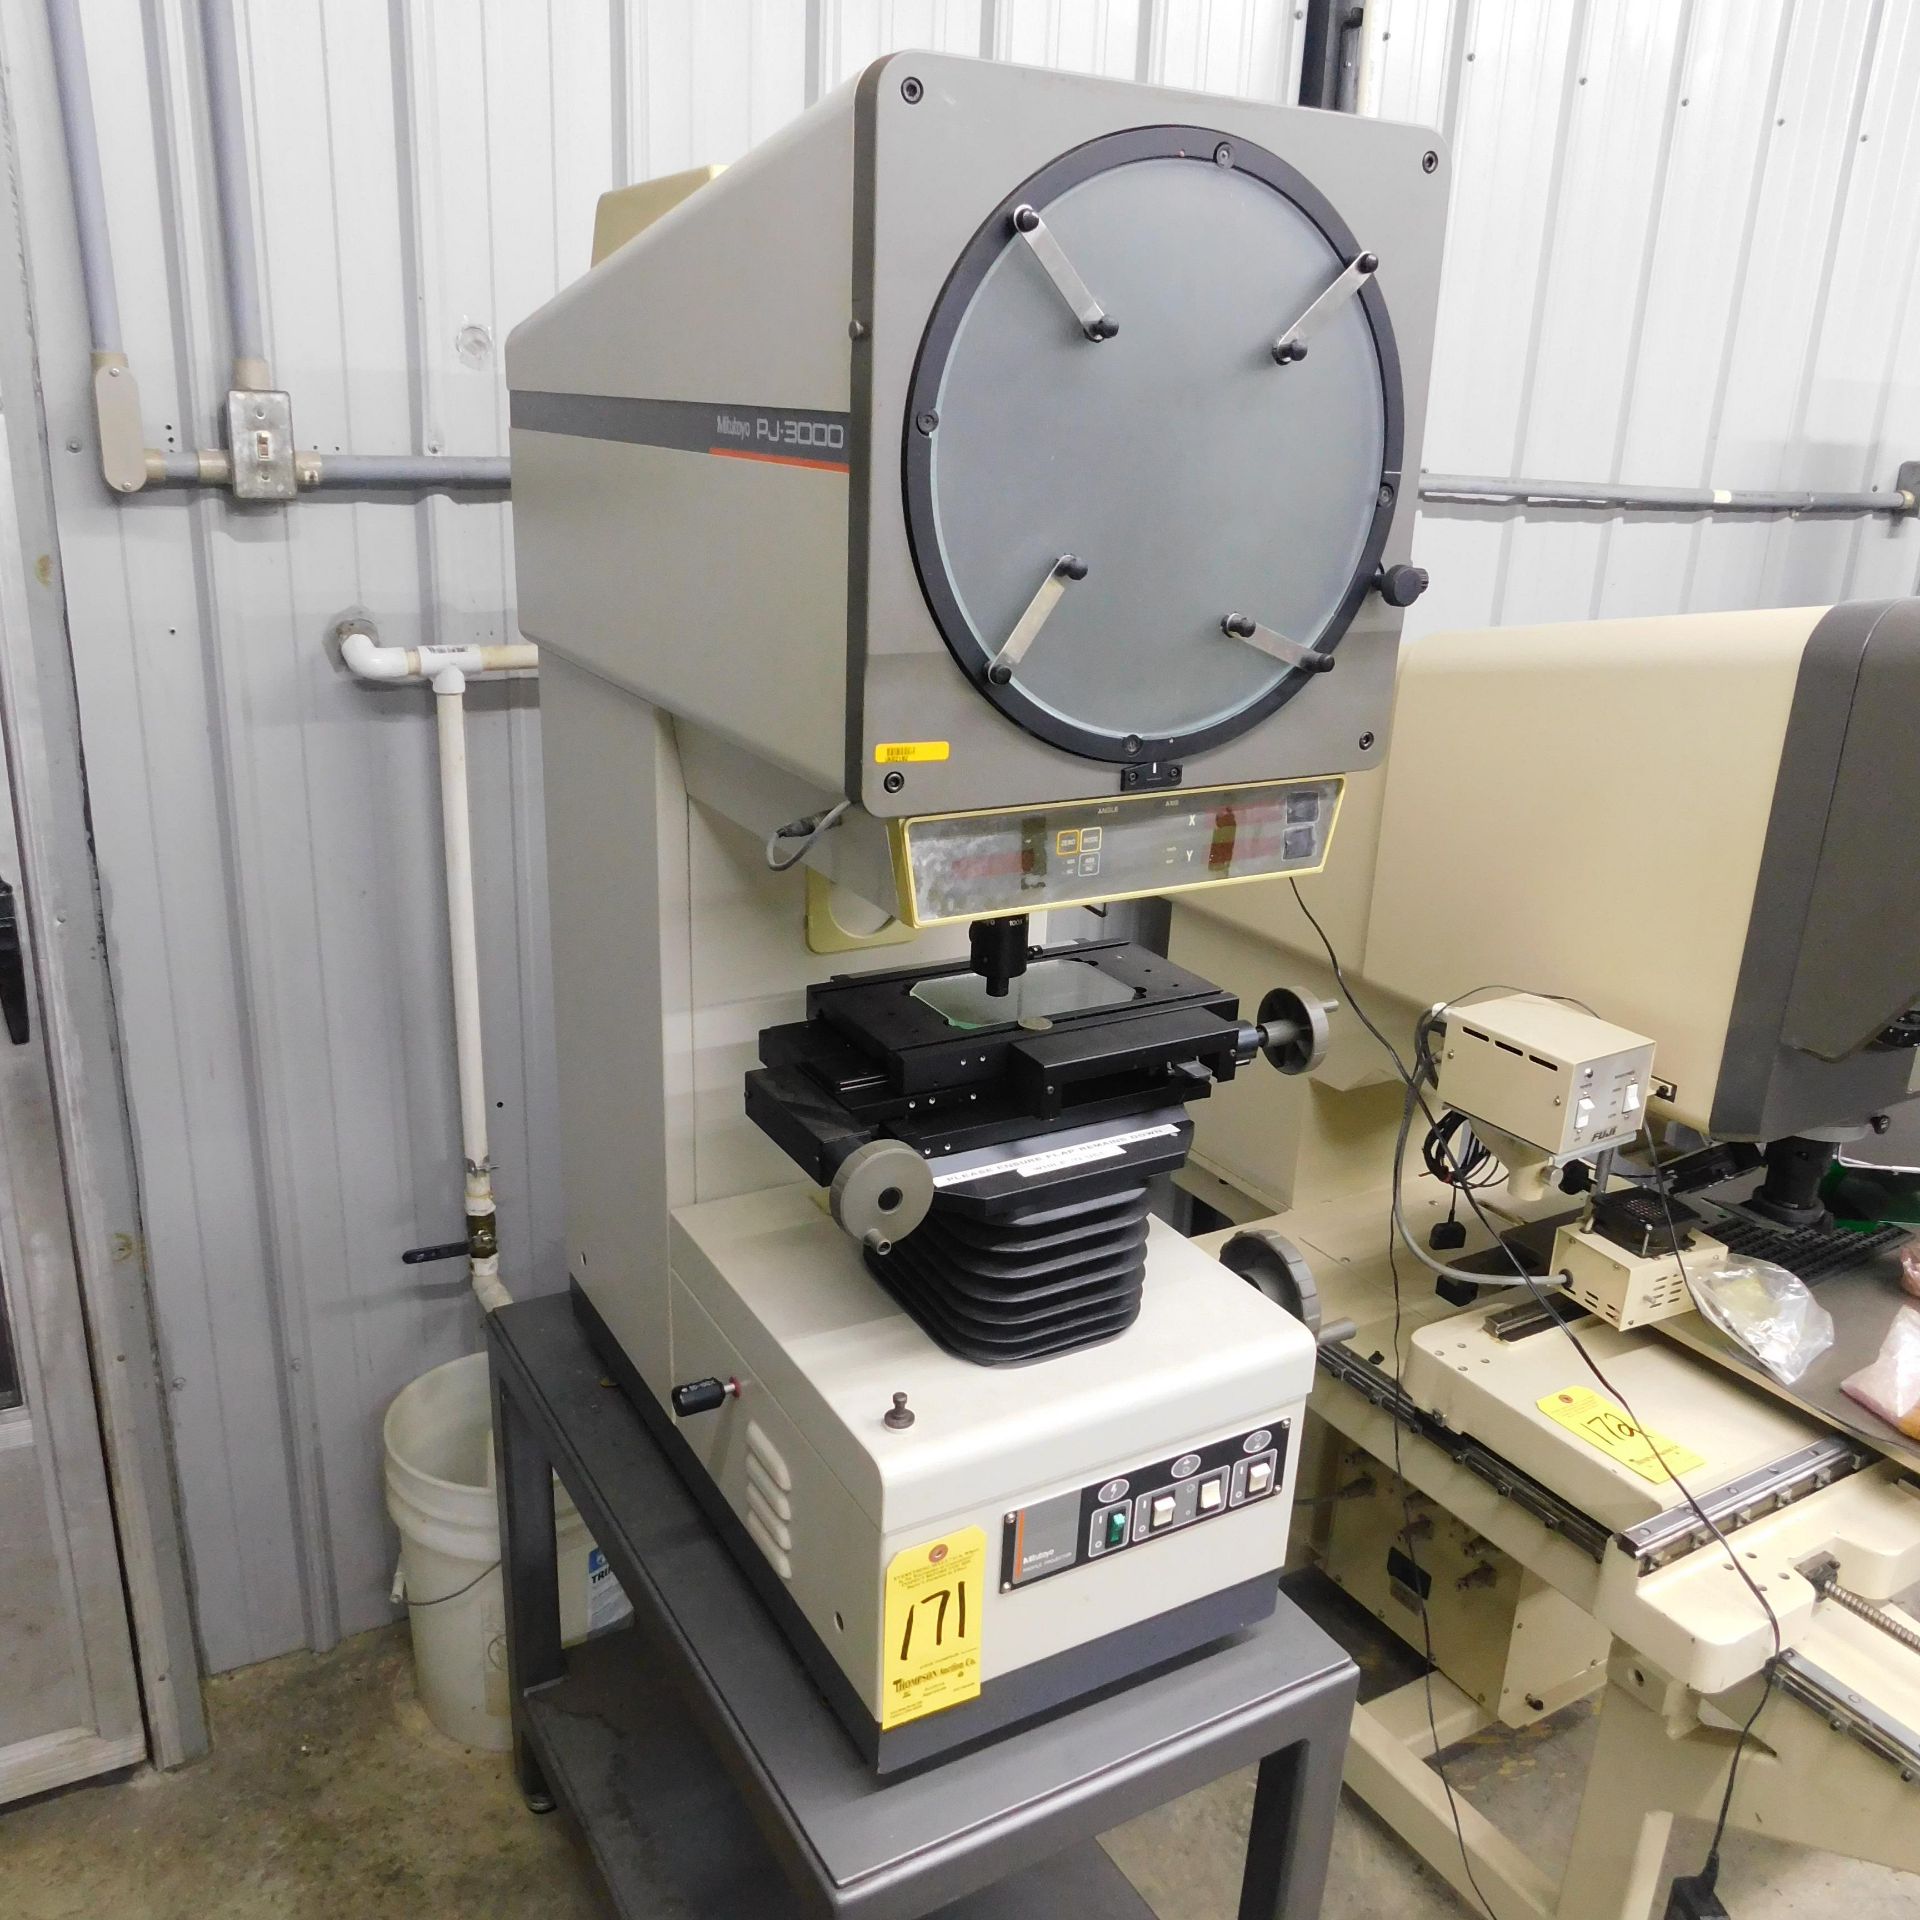 Mitutoyo PJ3000 Optical Comparator, s/n 810160, 12", Built In D.R.O., Surface Illumination, 100X